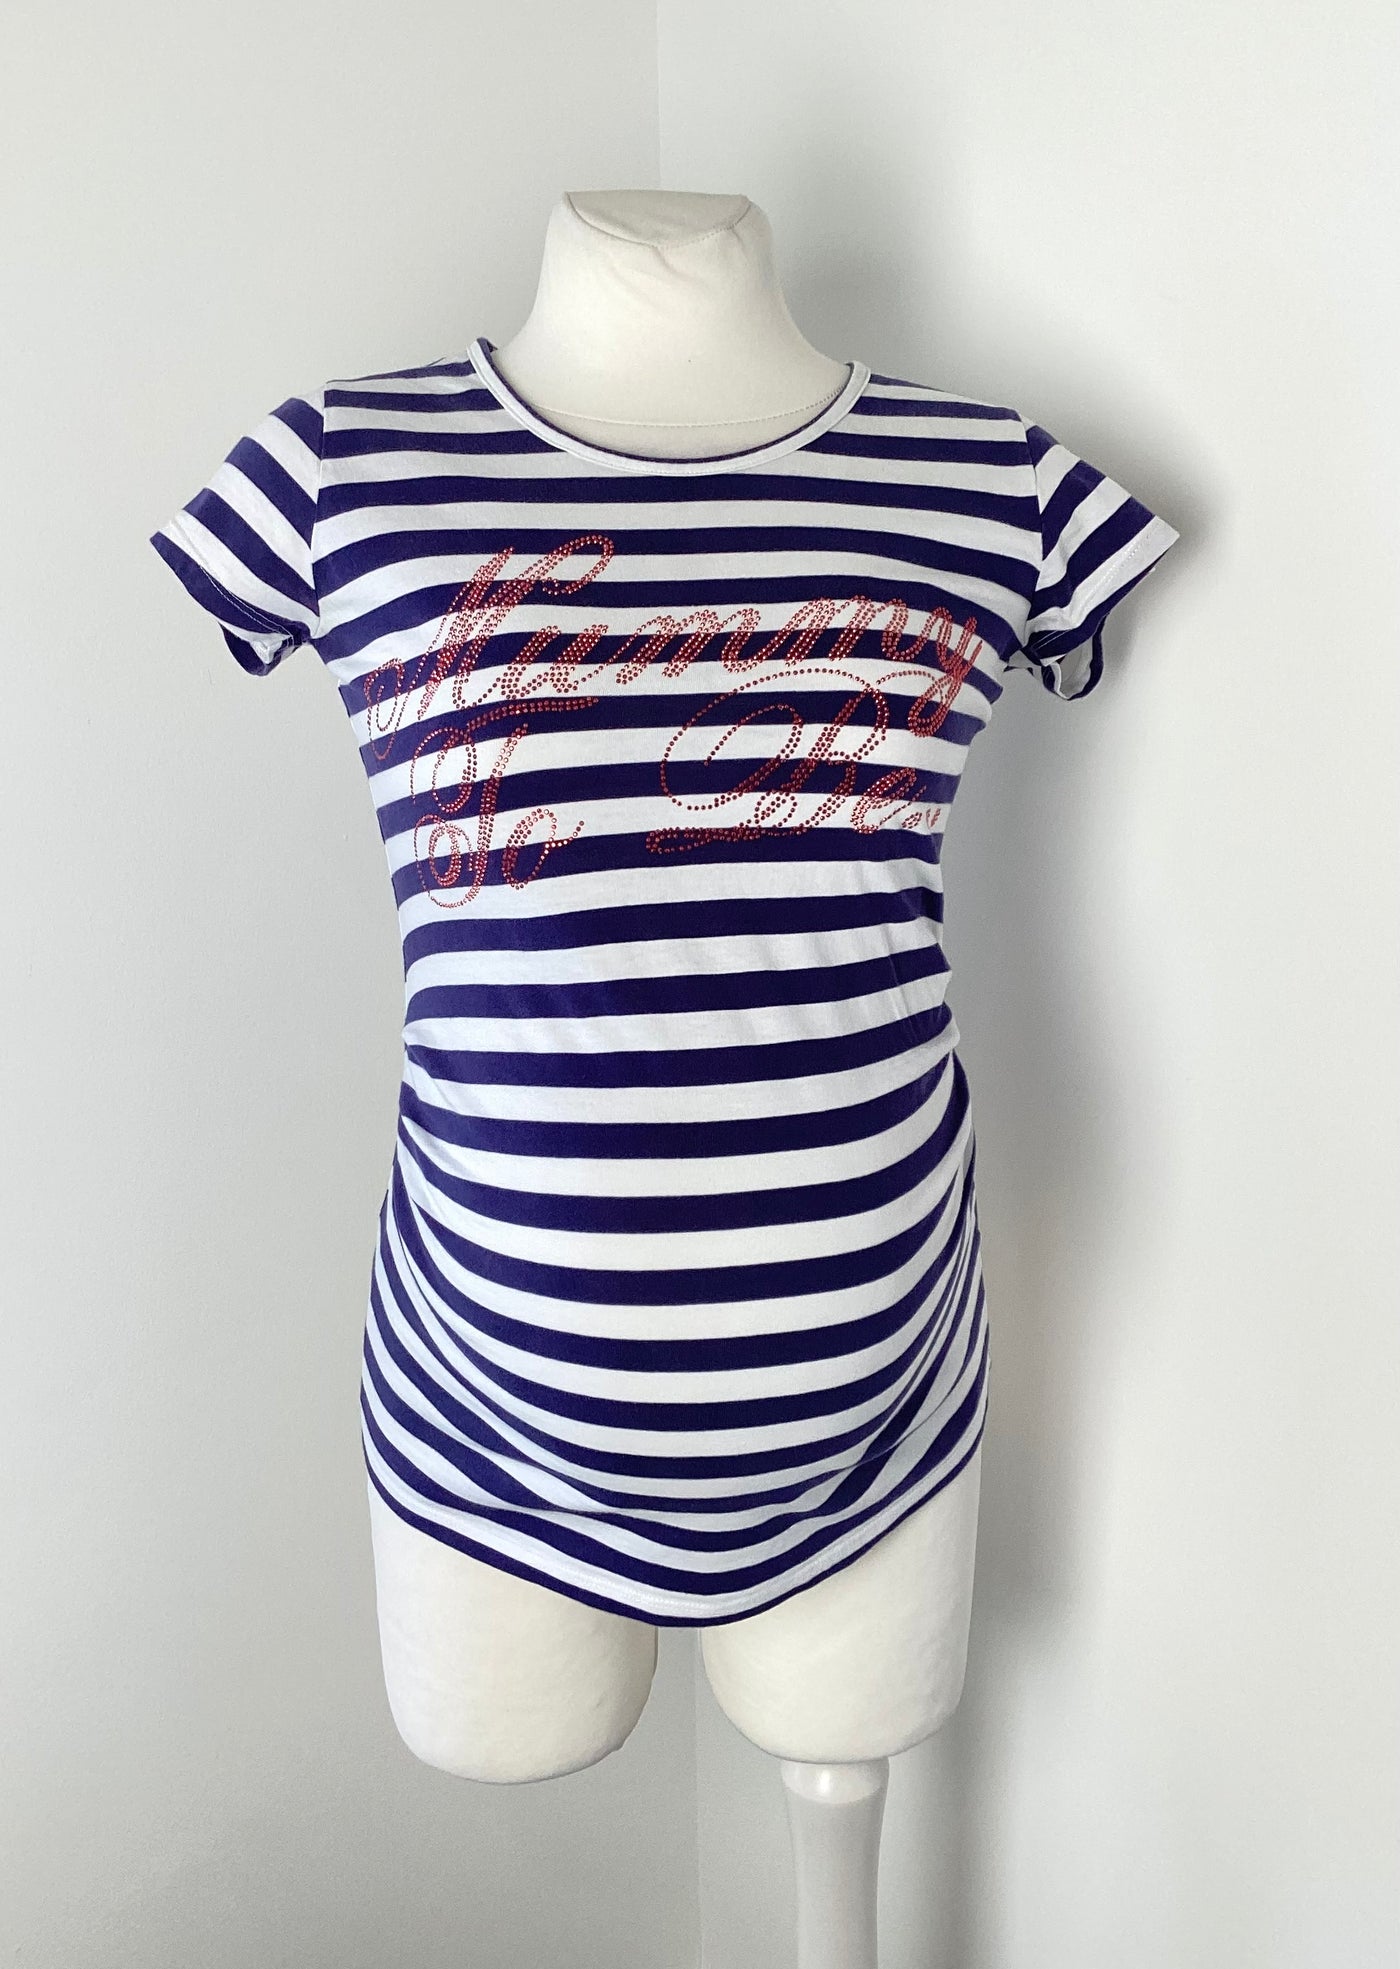 New Look Maternity navy & white striped t-shirt with red 'Mummy To Be' diamante logo - Size 8